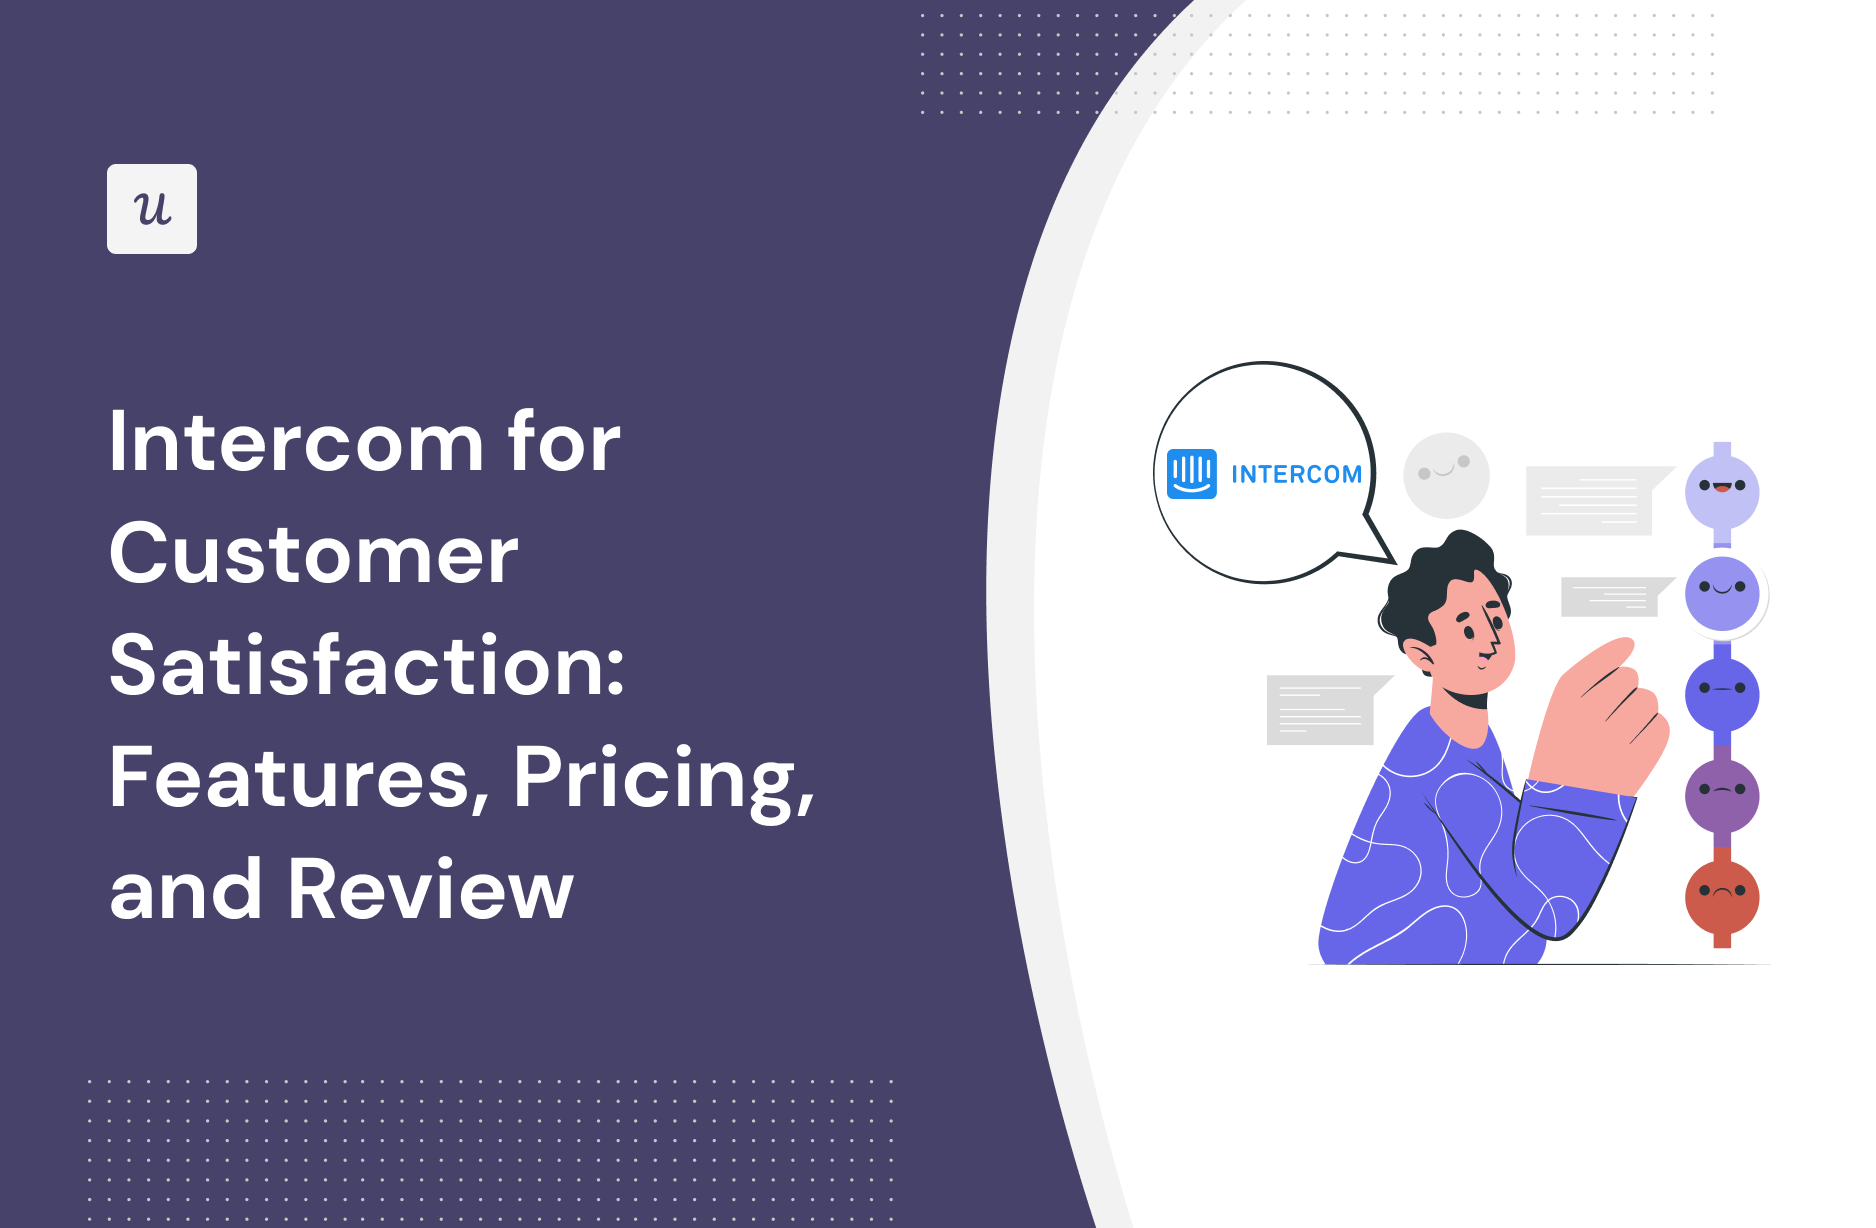 Intercom for Customer Satisfaction: Features, Pricing, and Review